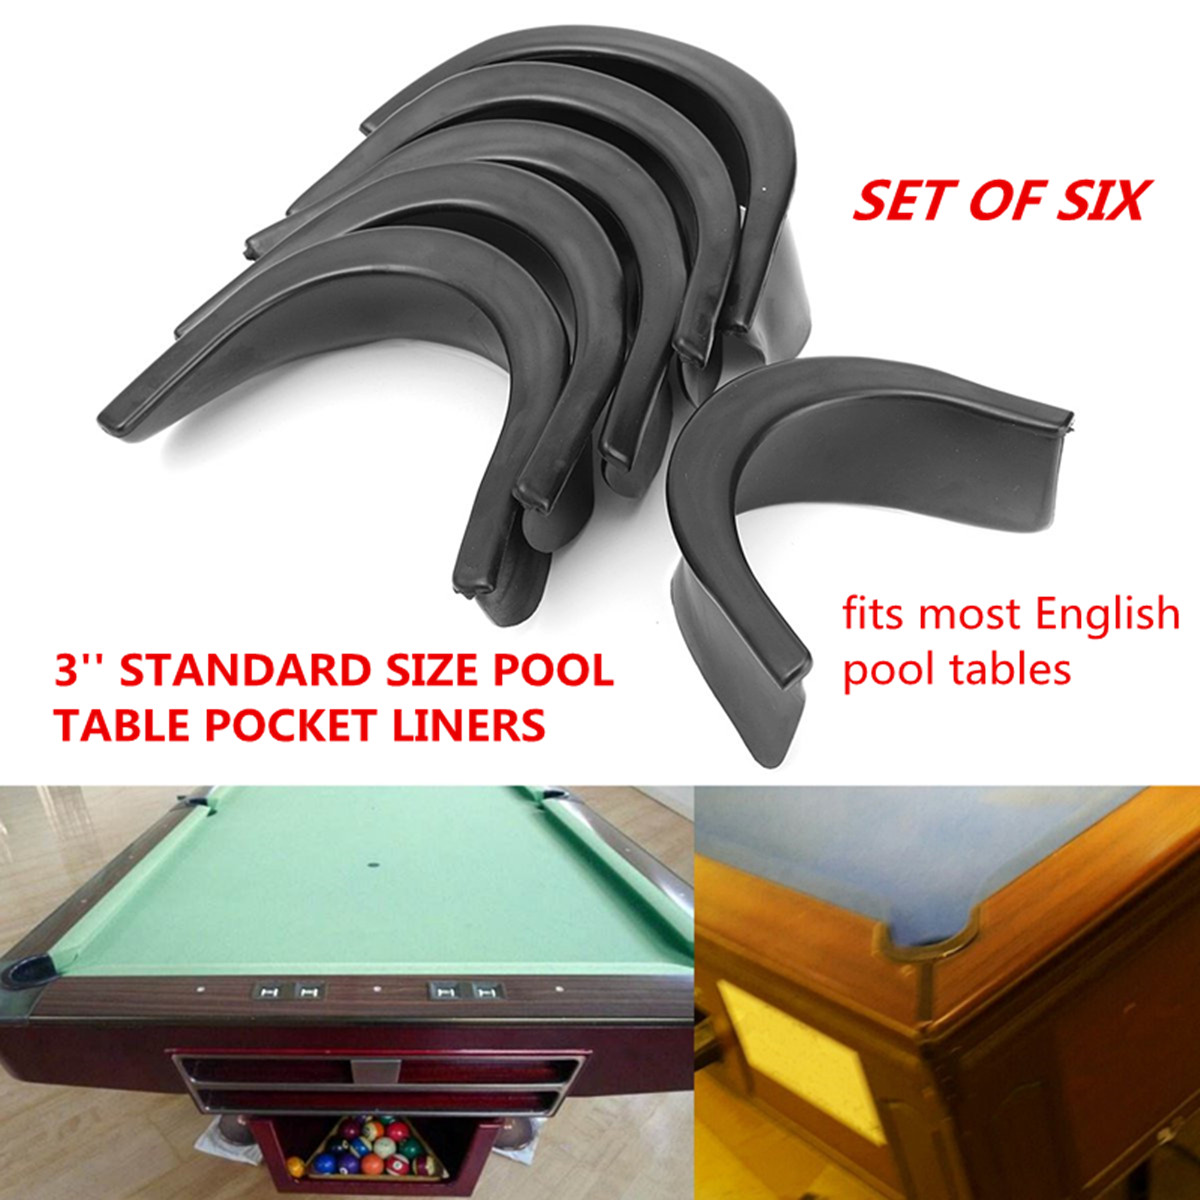 Snooker Table Nets 6Pcs Dirt-Proof Cotton Thread Billiards Tables Net Pool Snooker Meshes Pockets Bag Professional Snooker Accessories